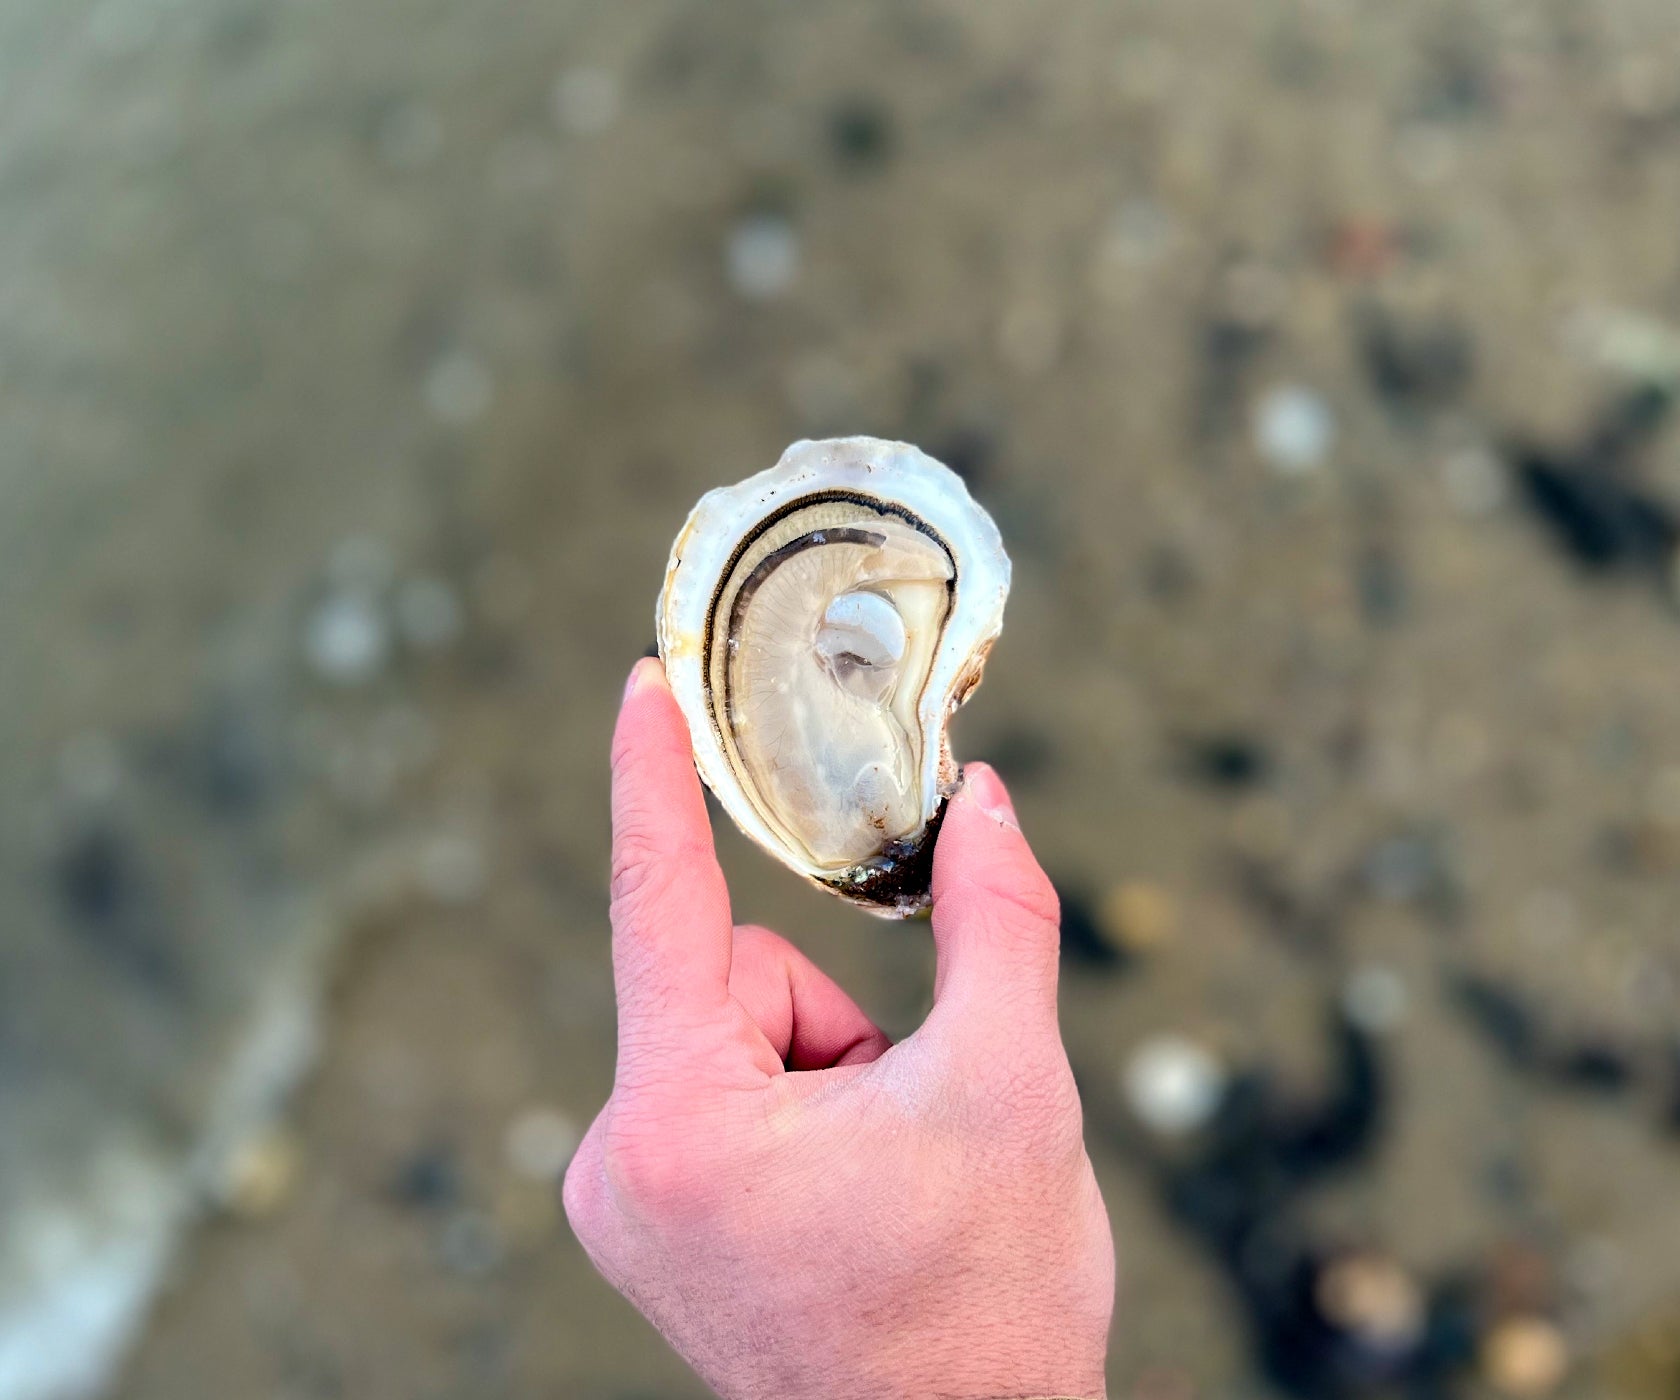 Northern Belle Oysters from Prince Edward Island, CAN